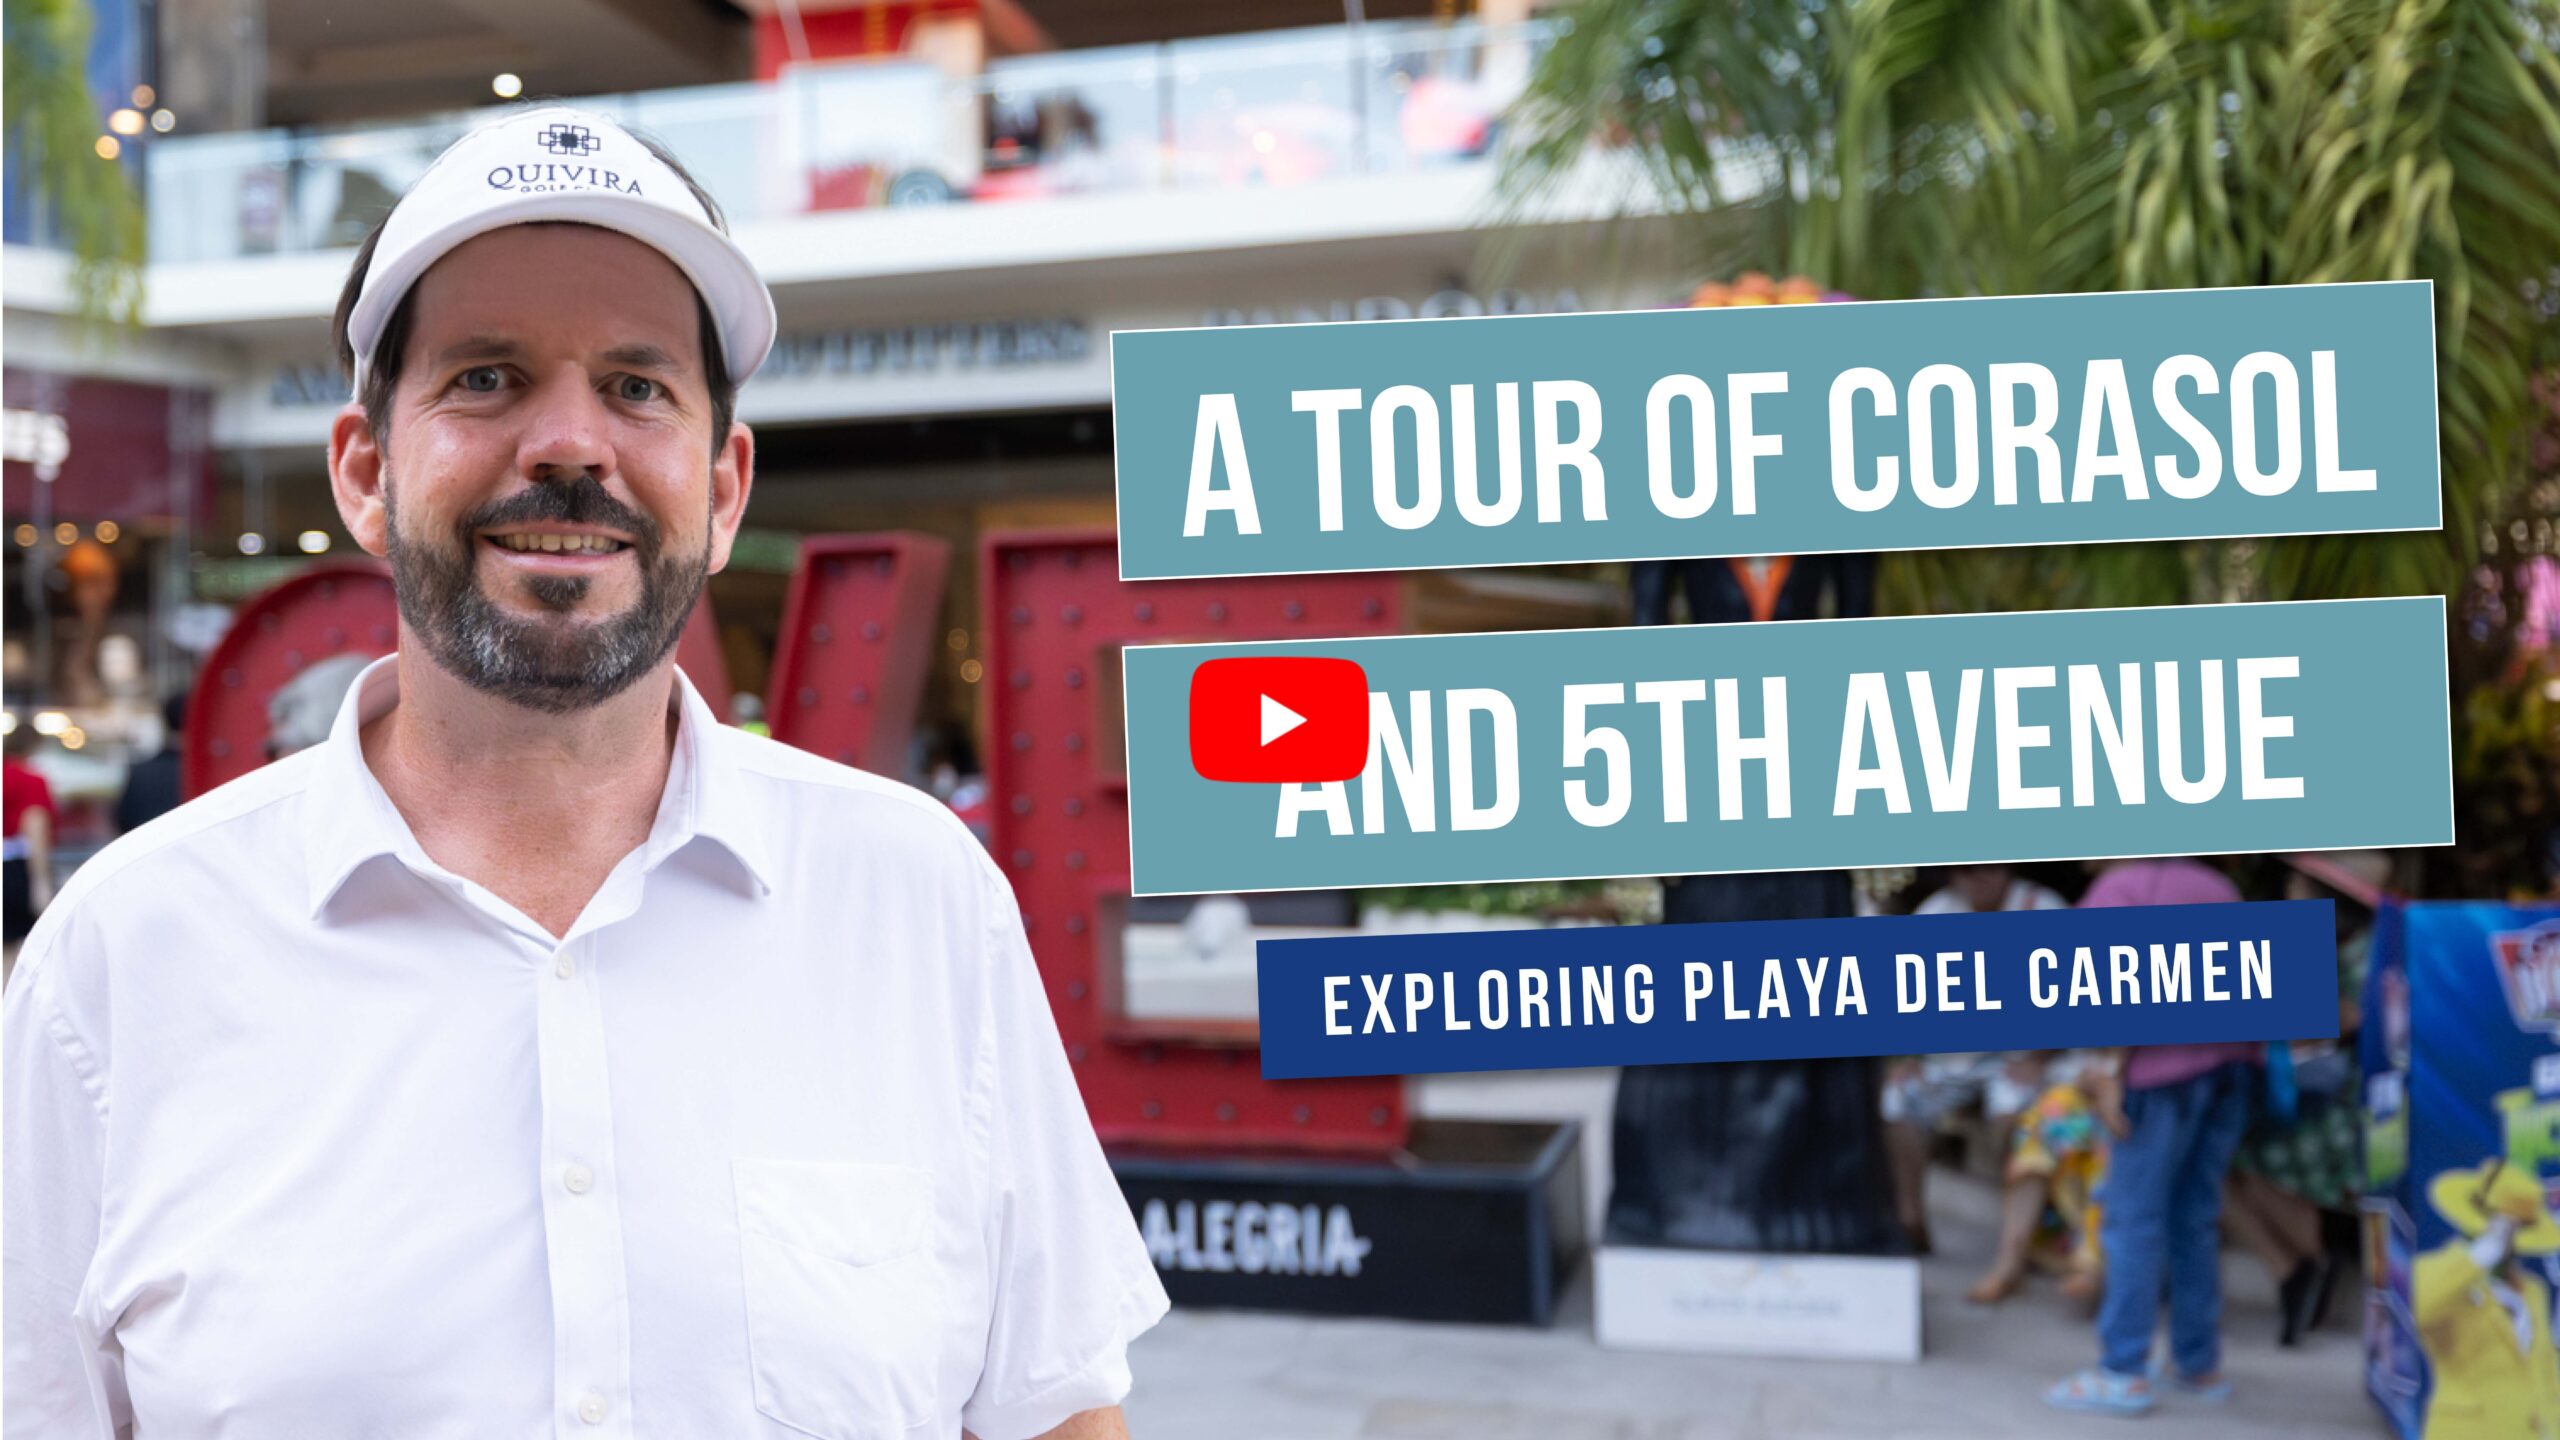 Video: A Tour of Playa del Carmen and Corasol